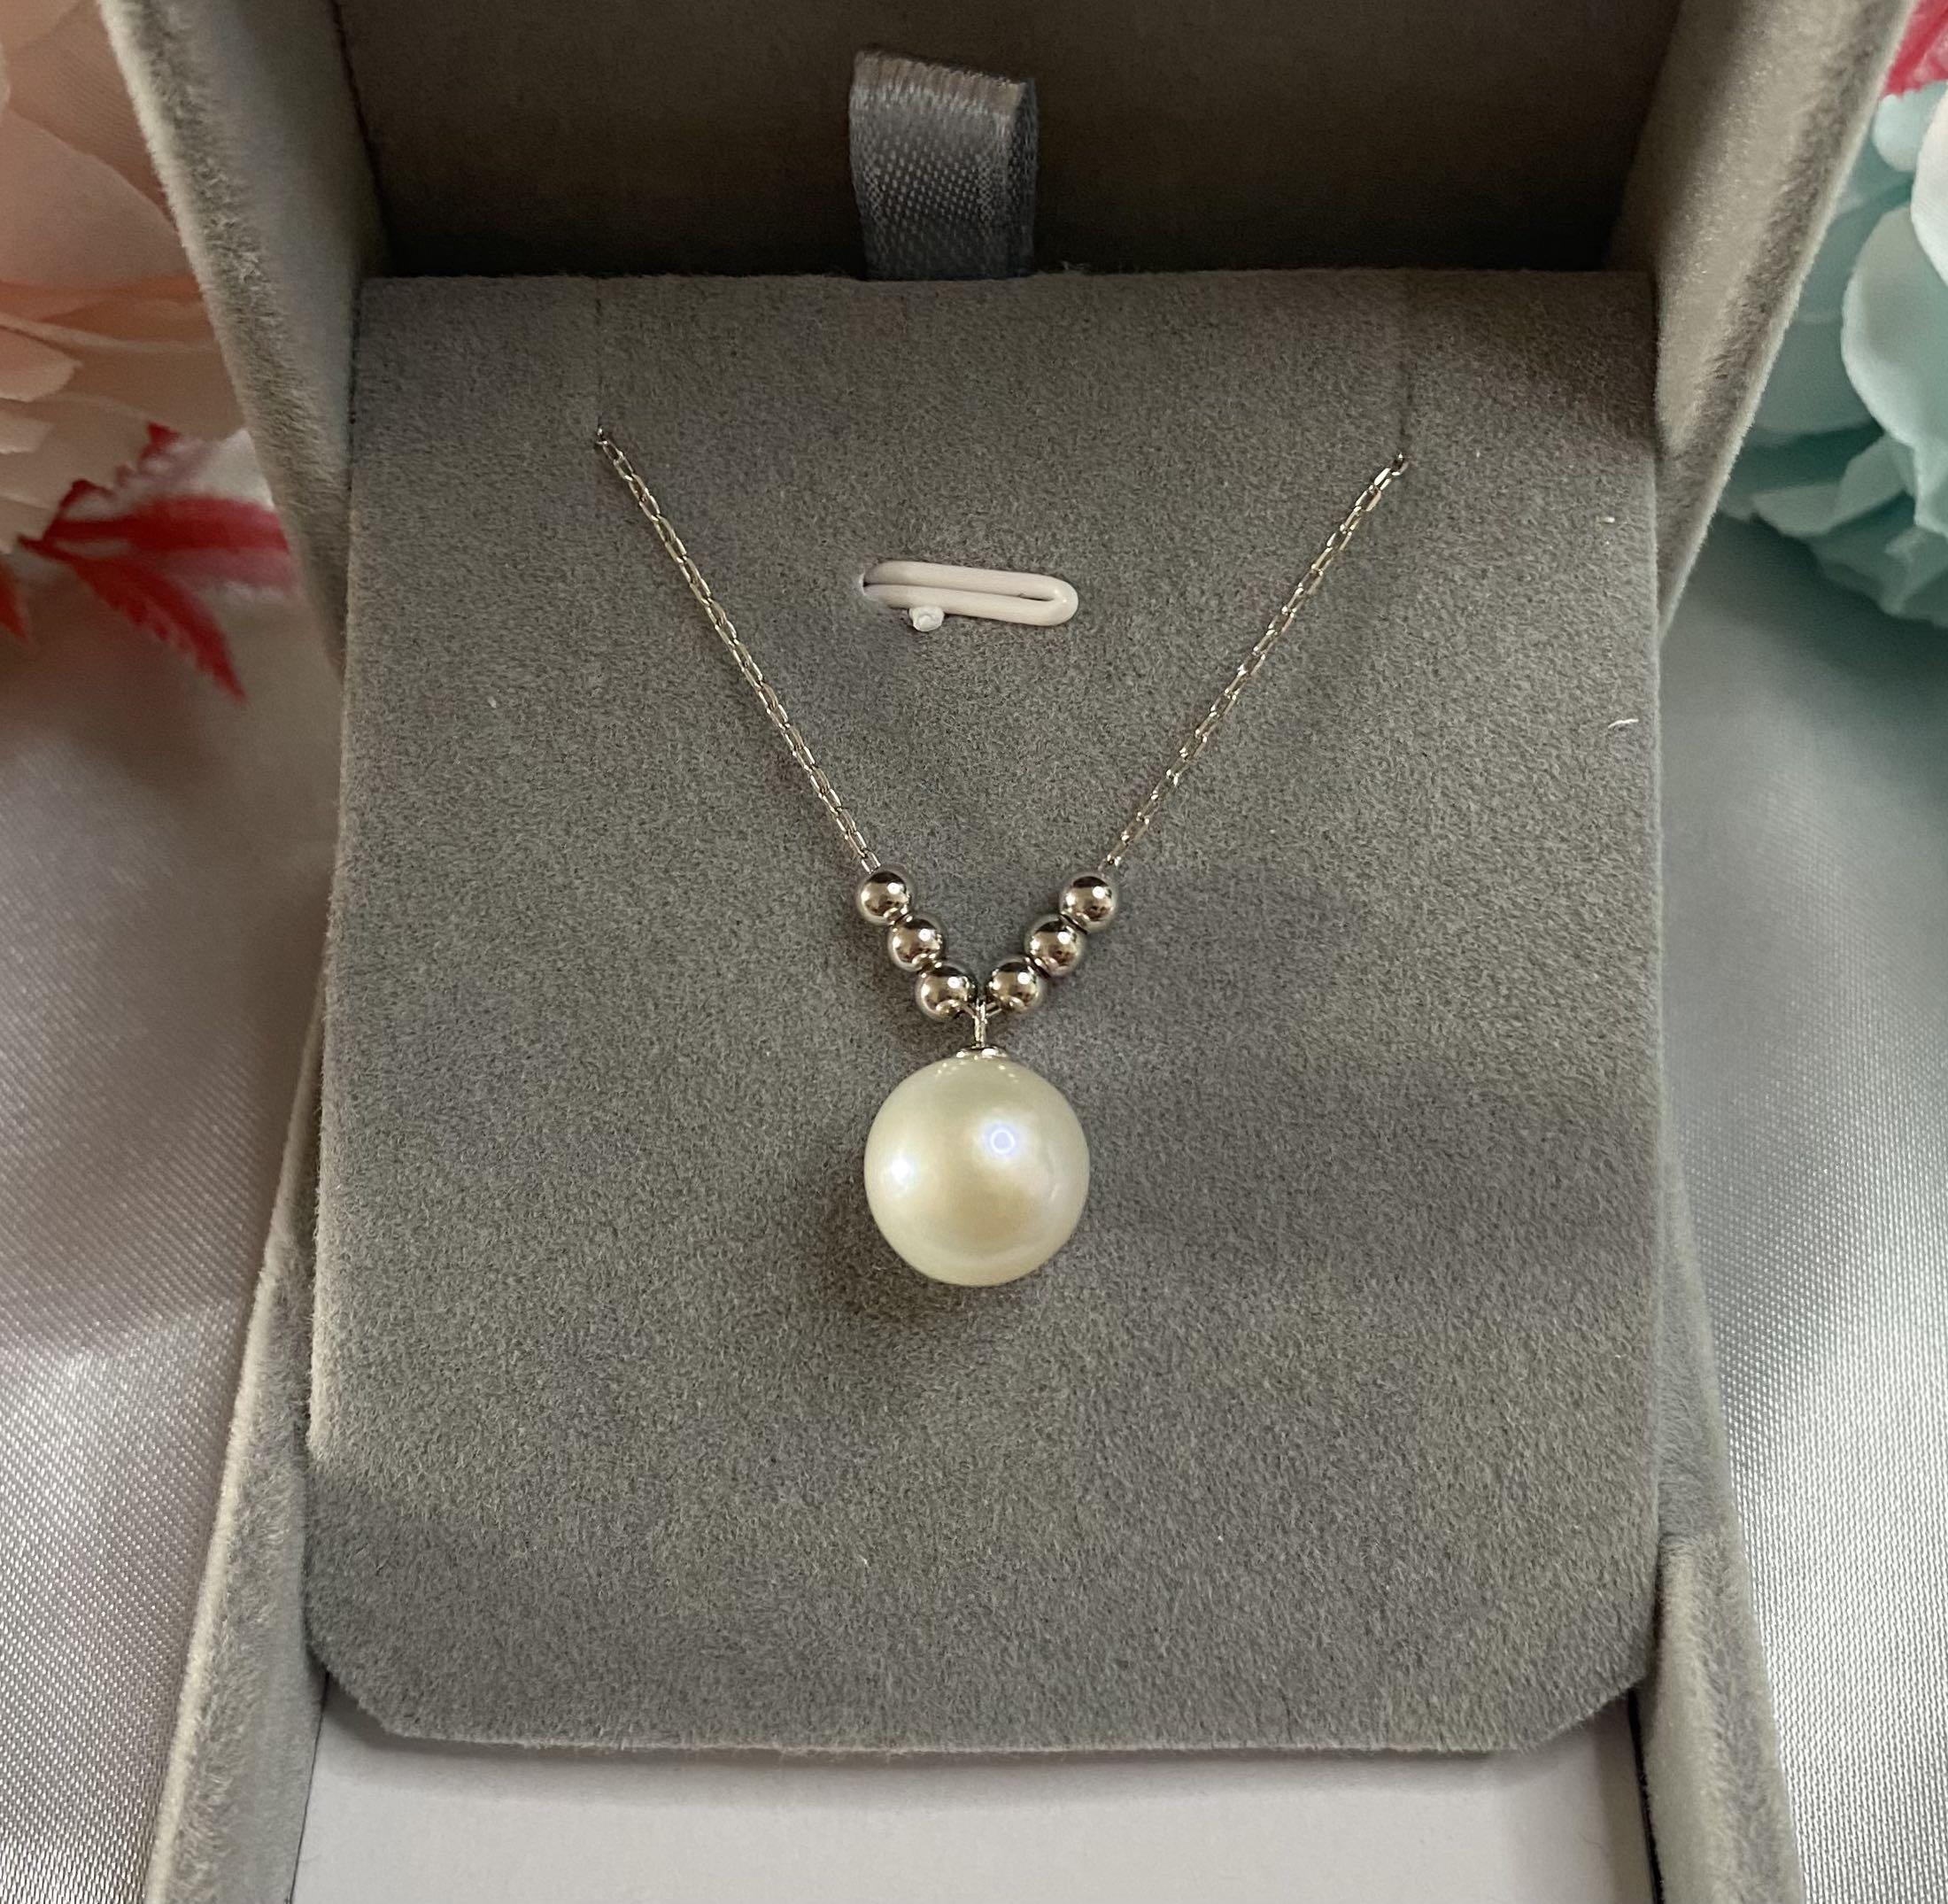 Silver Chain Genuine white Freshwater Pearl Fashion Pendant Necklace Jewelry